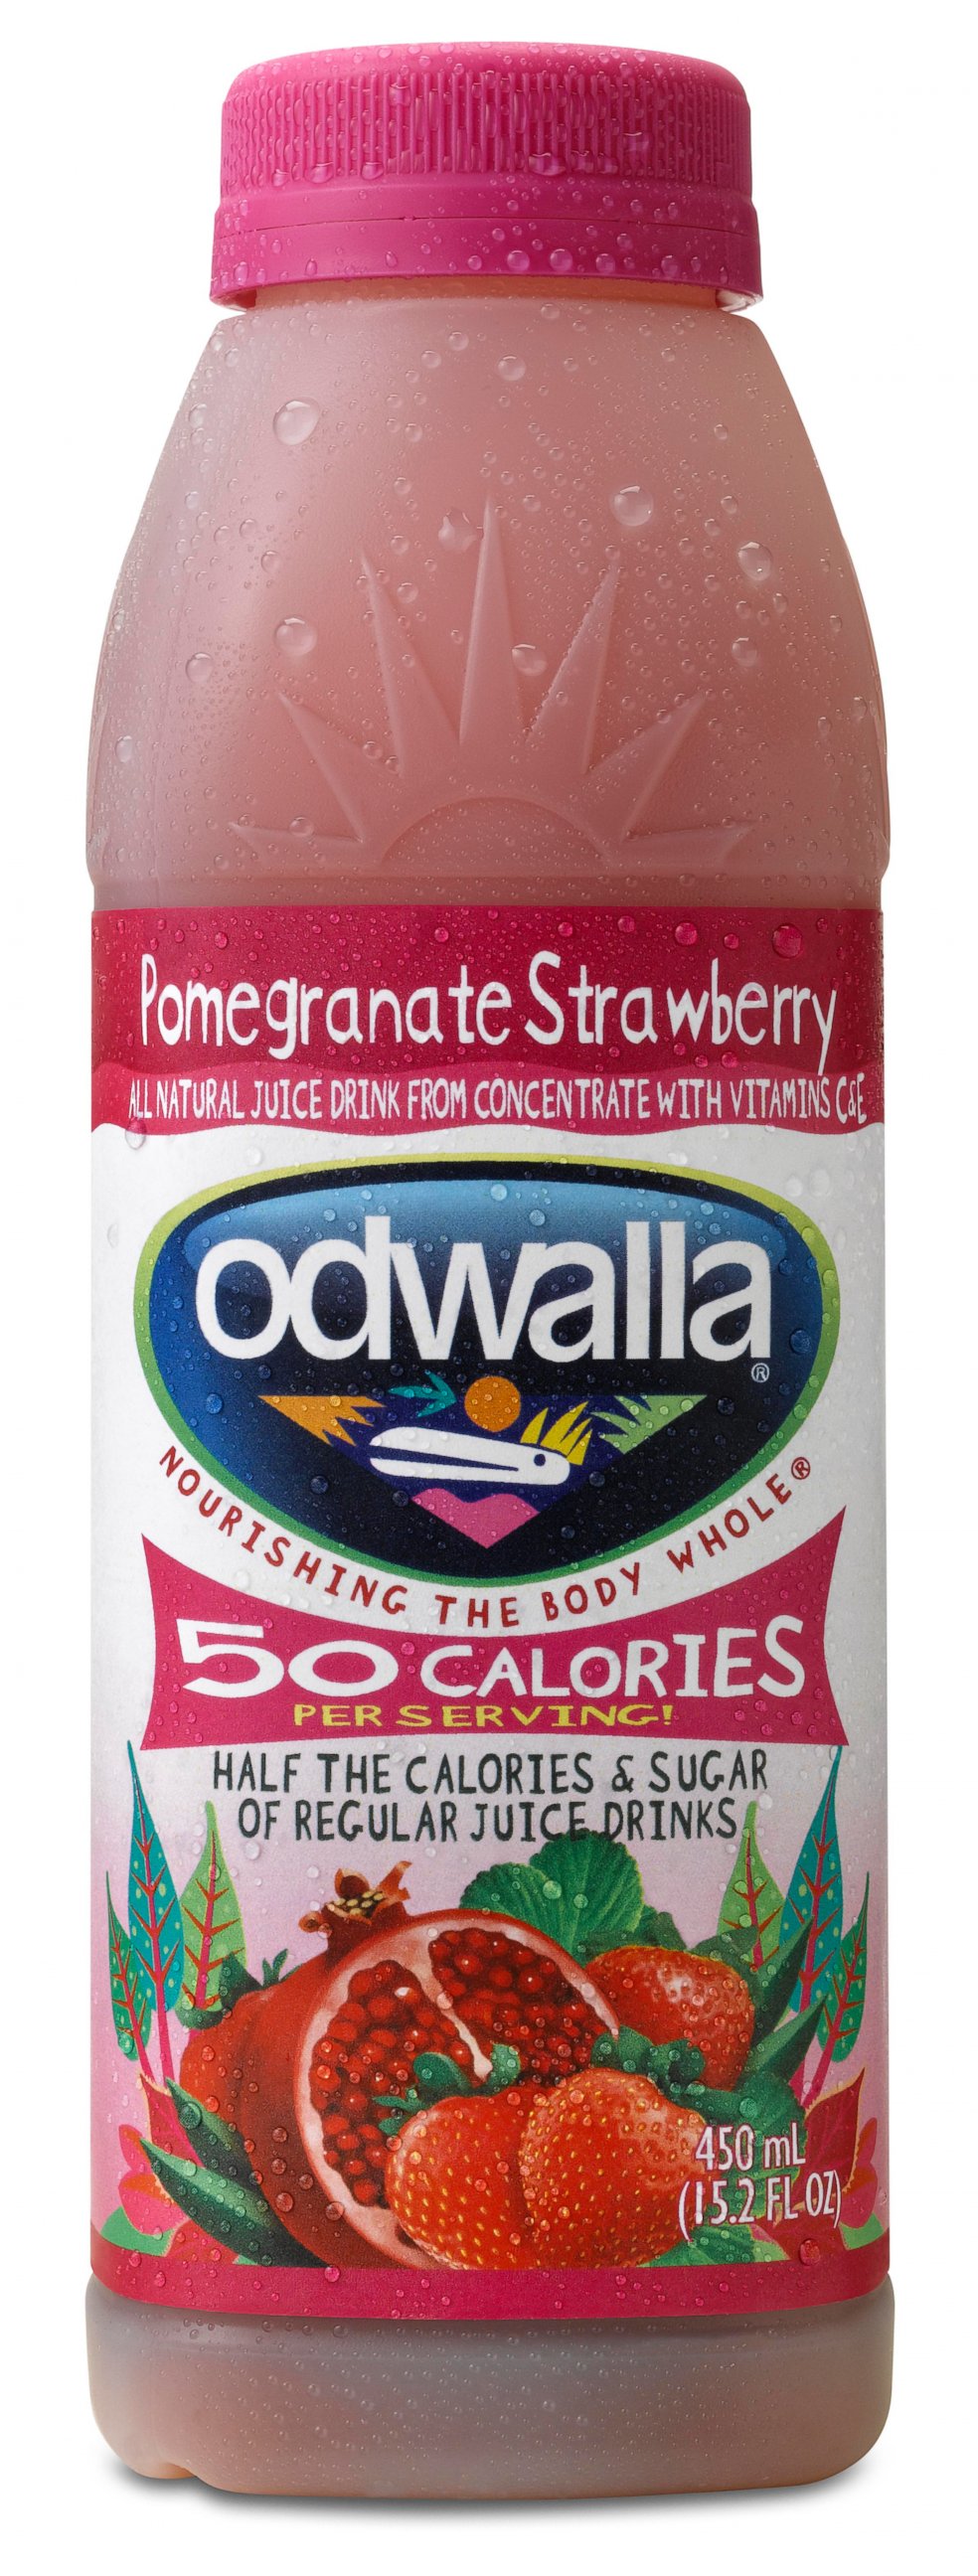 PHOTO: A bottle of Odwalla Pomegranate Strawberry is pictured in this undated product image.